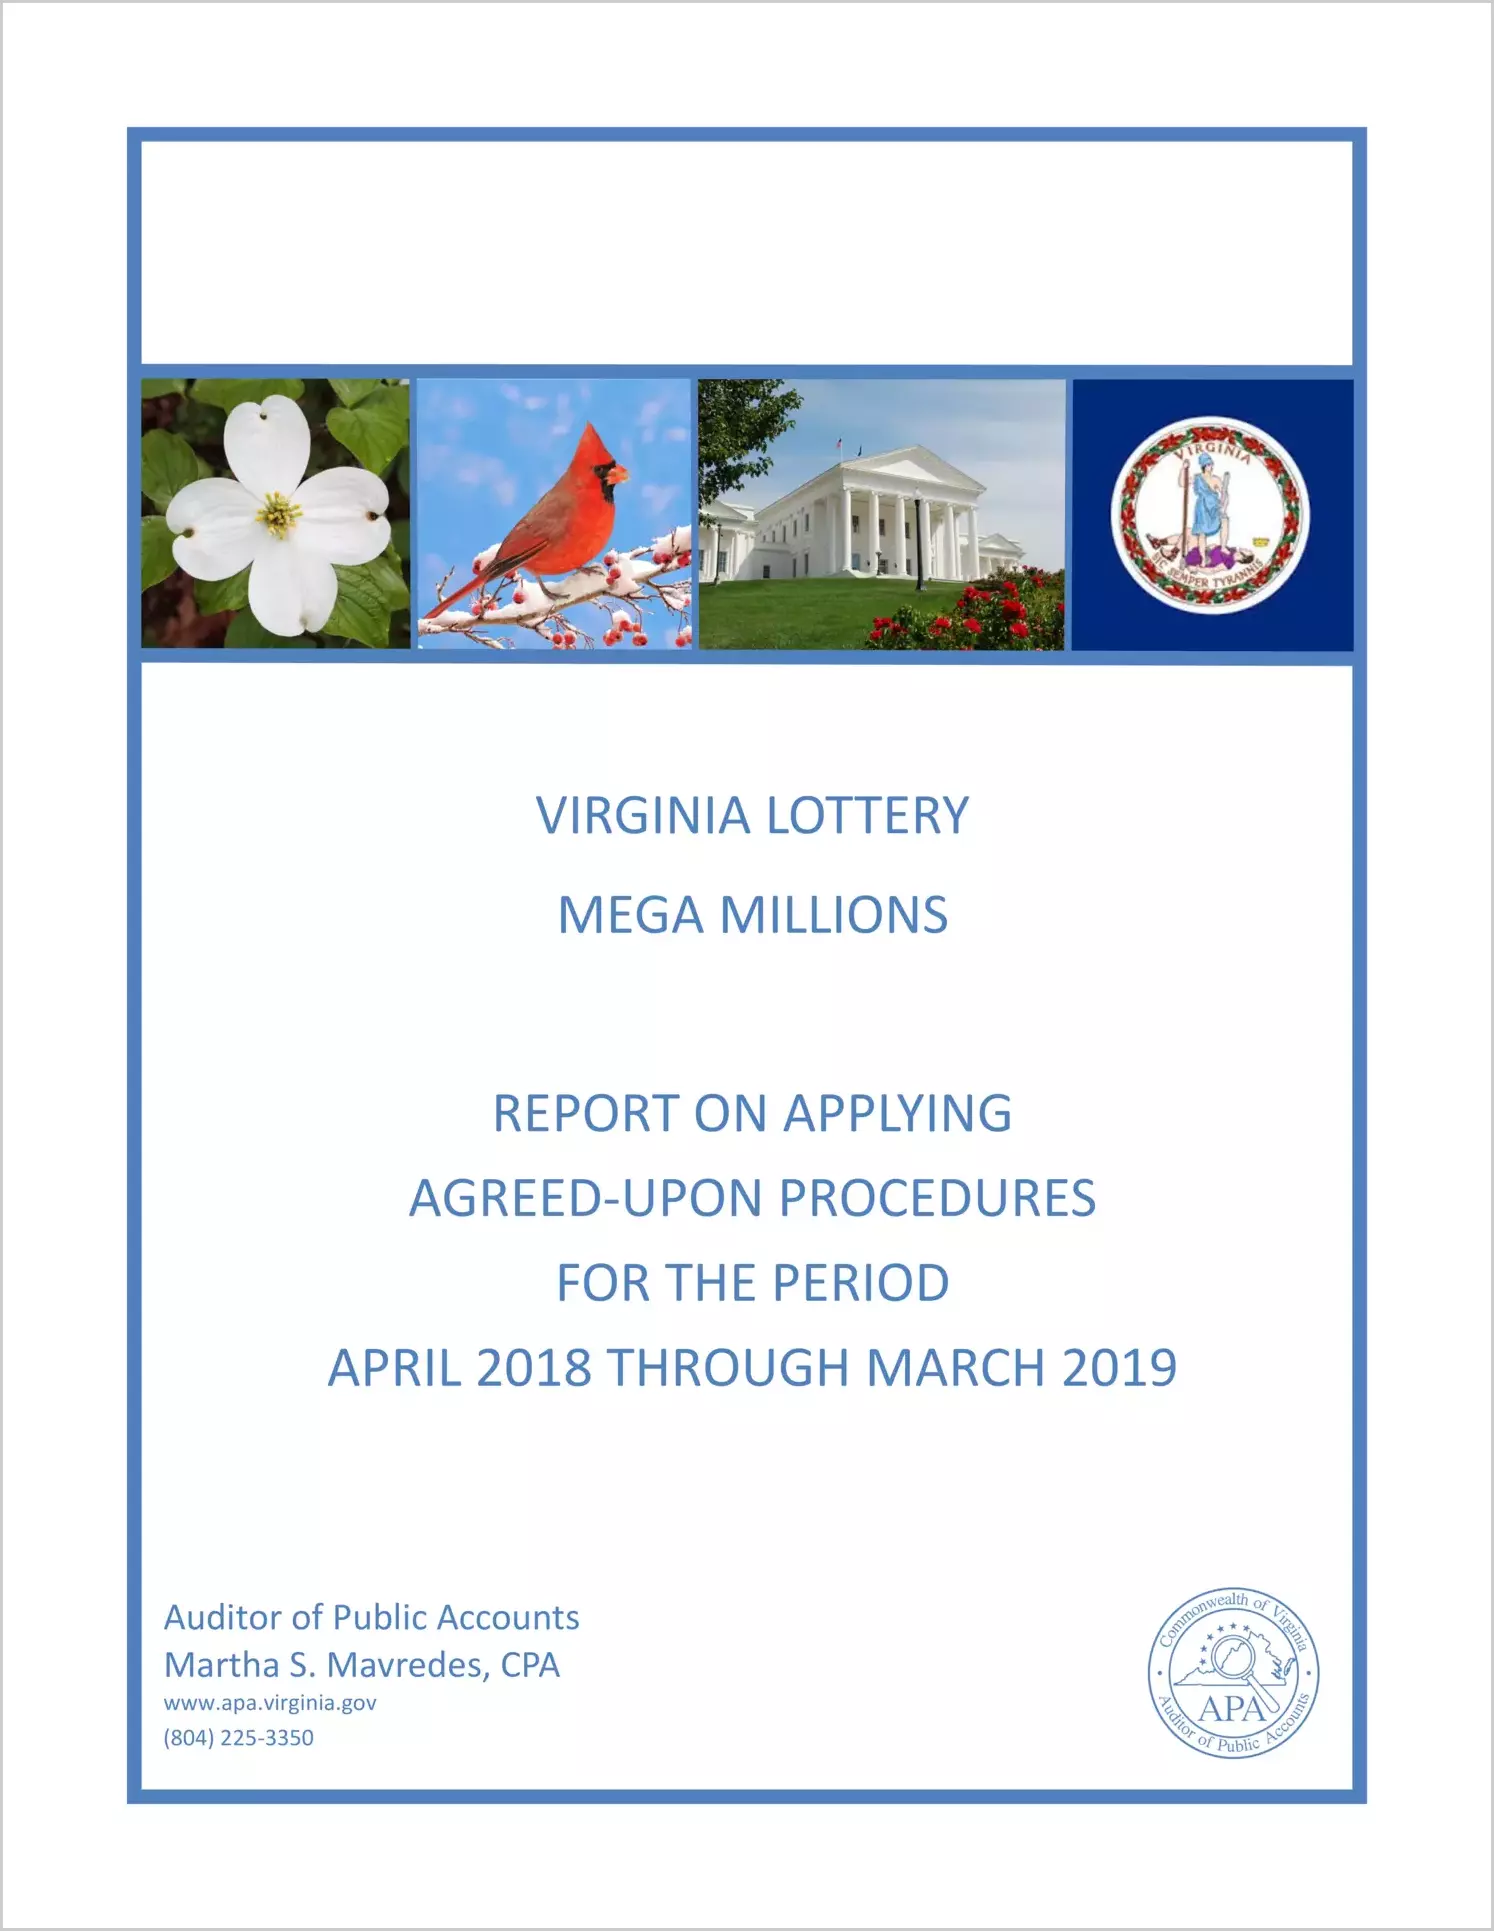 VA Lottery Mega Millions report on Applying Agreed-Upon Procedures for the period April 2018 through March 2019